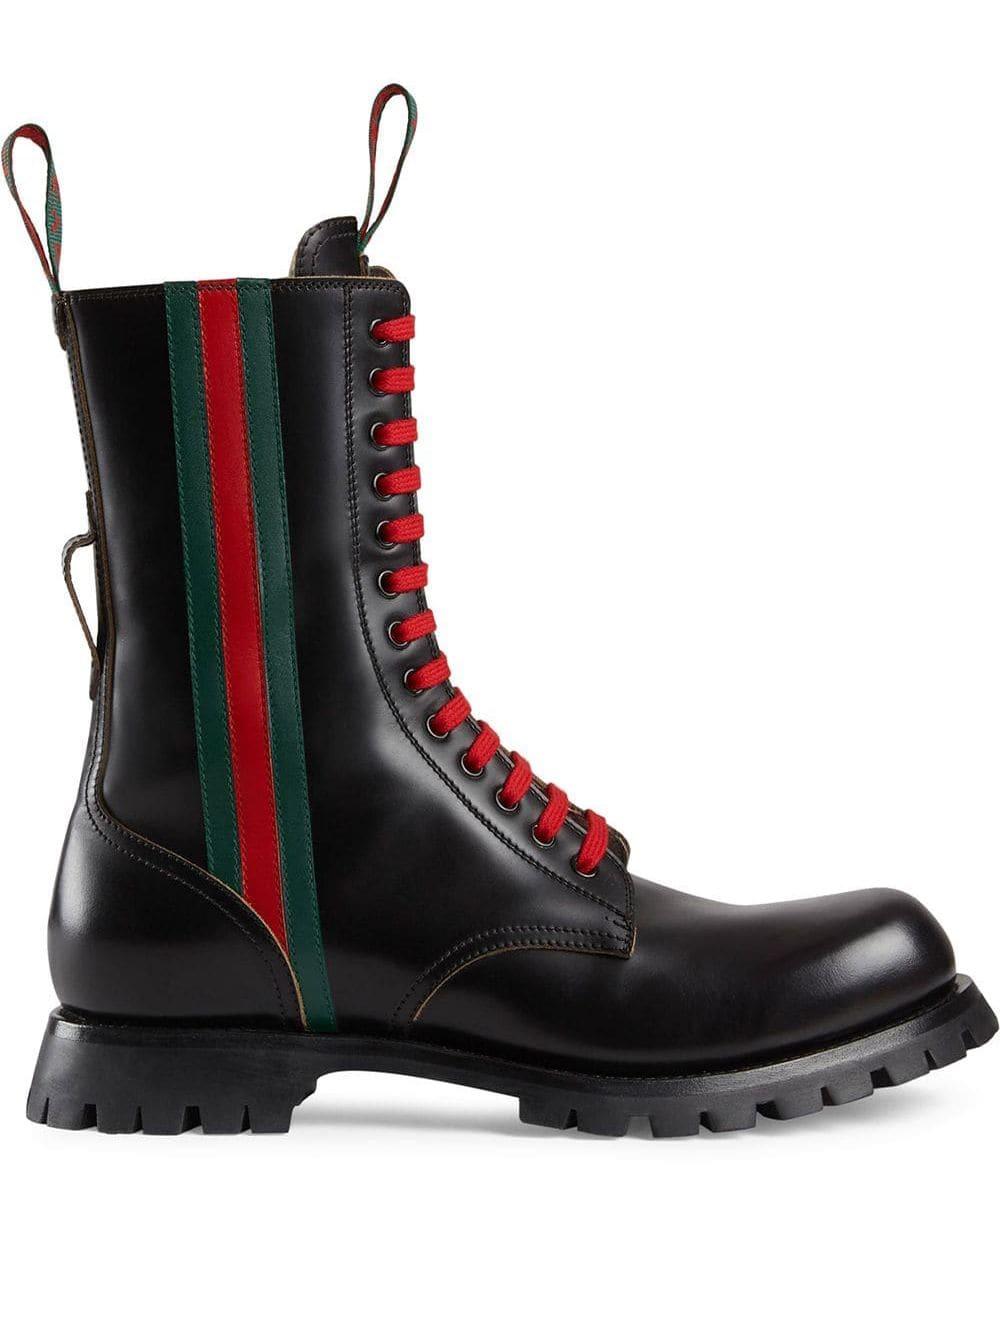 gucci black leather boots